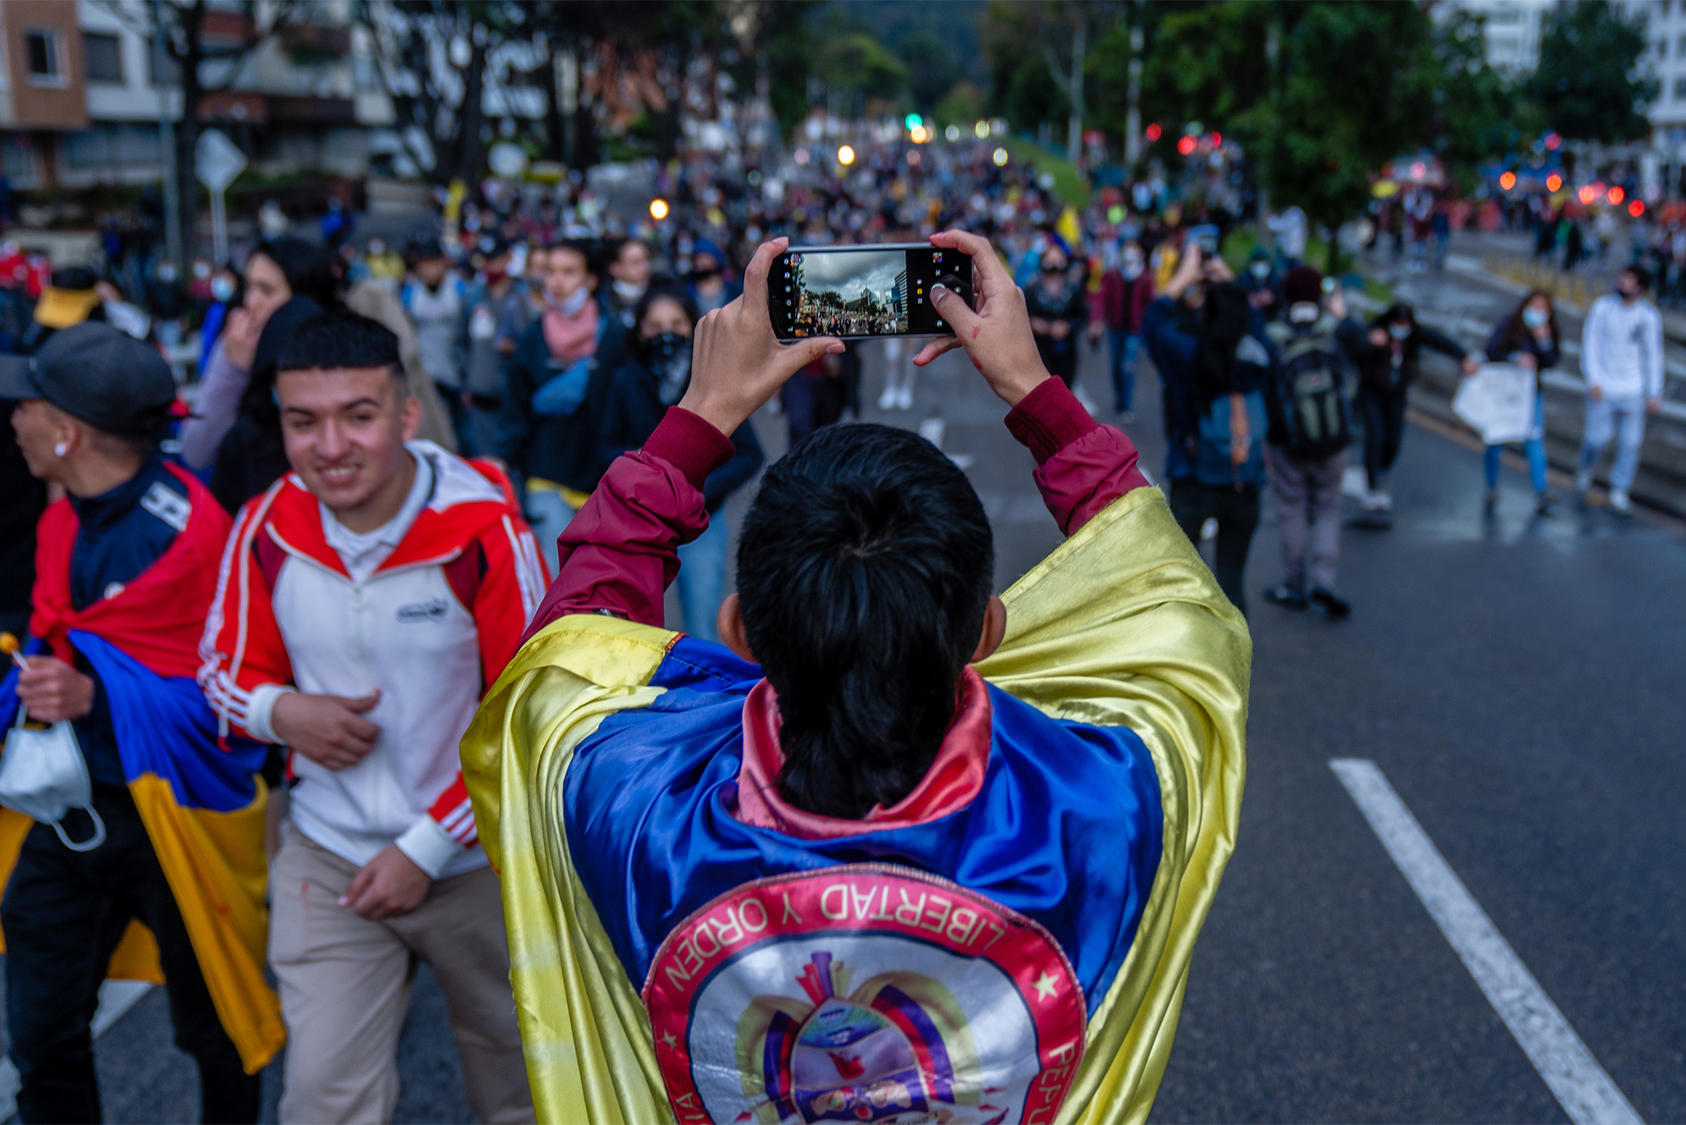 A demonstrator uses his smartphone to capture a protest march in Bogotá, Colombia. May 4, 2021. (Federico Rios/The New York Times)